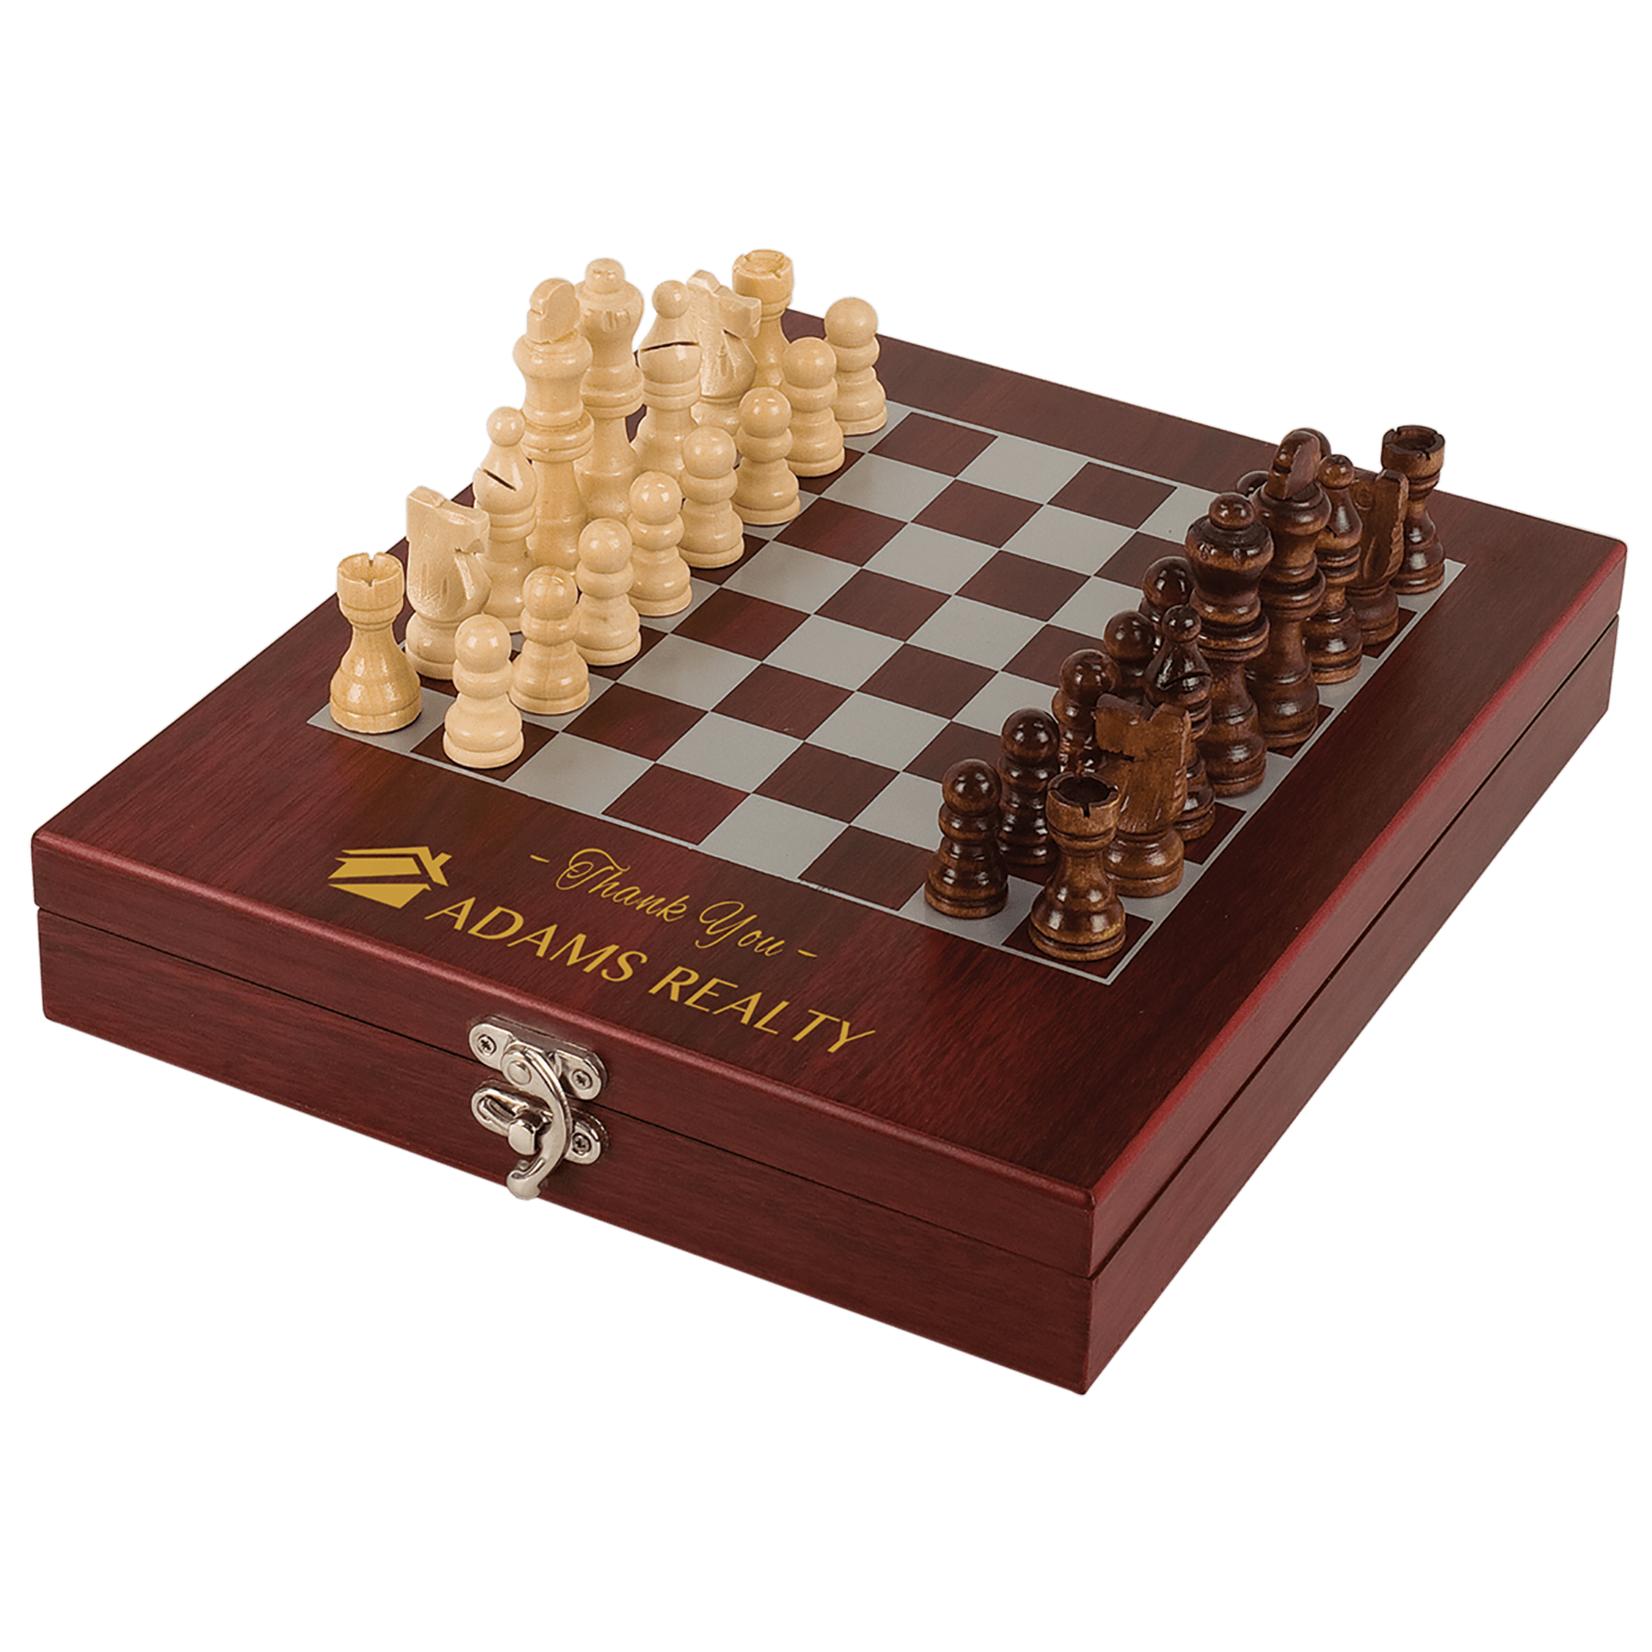 JDS Industries CHES01A Chess Set includes engraving on top